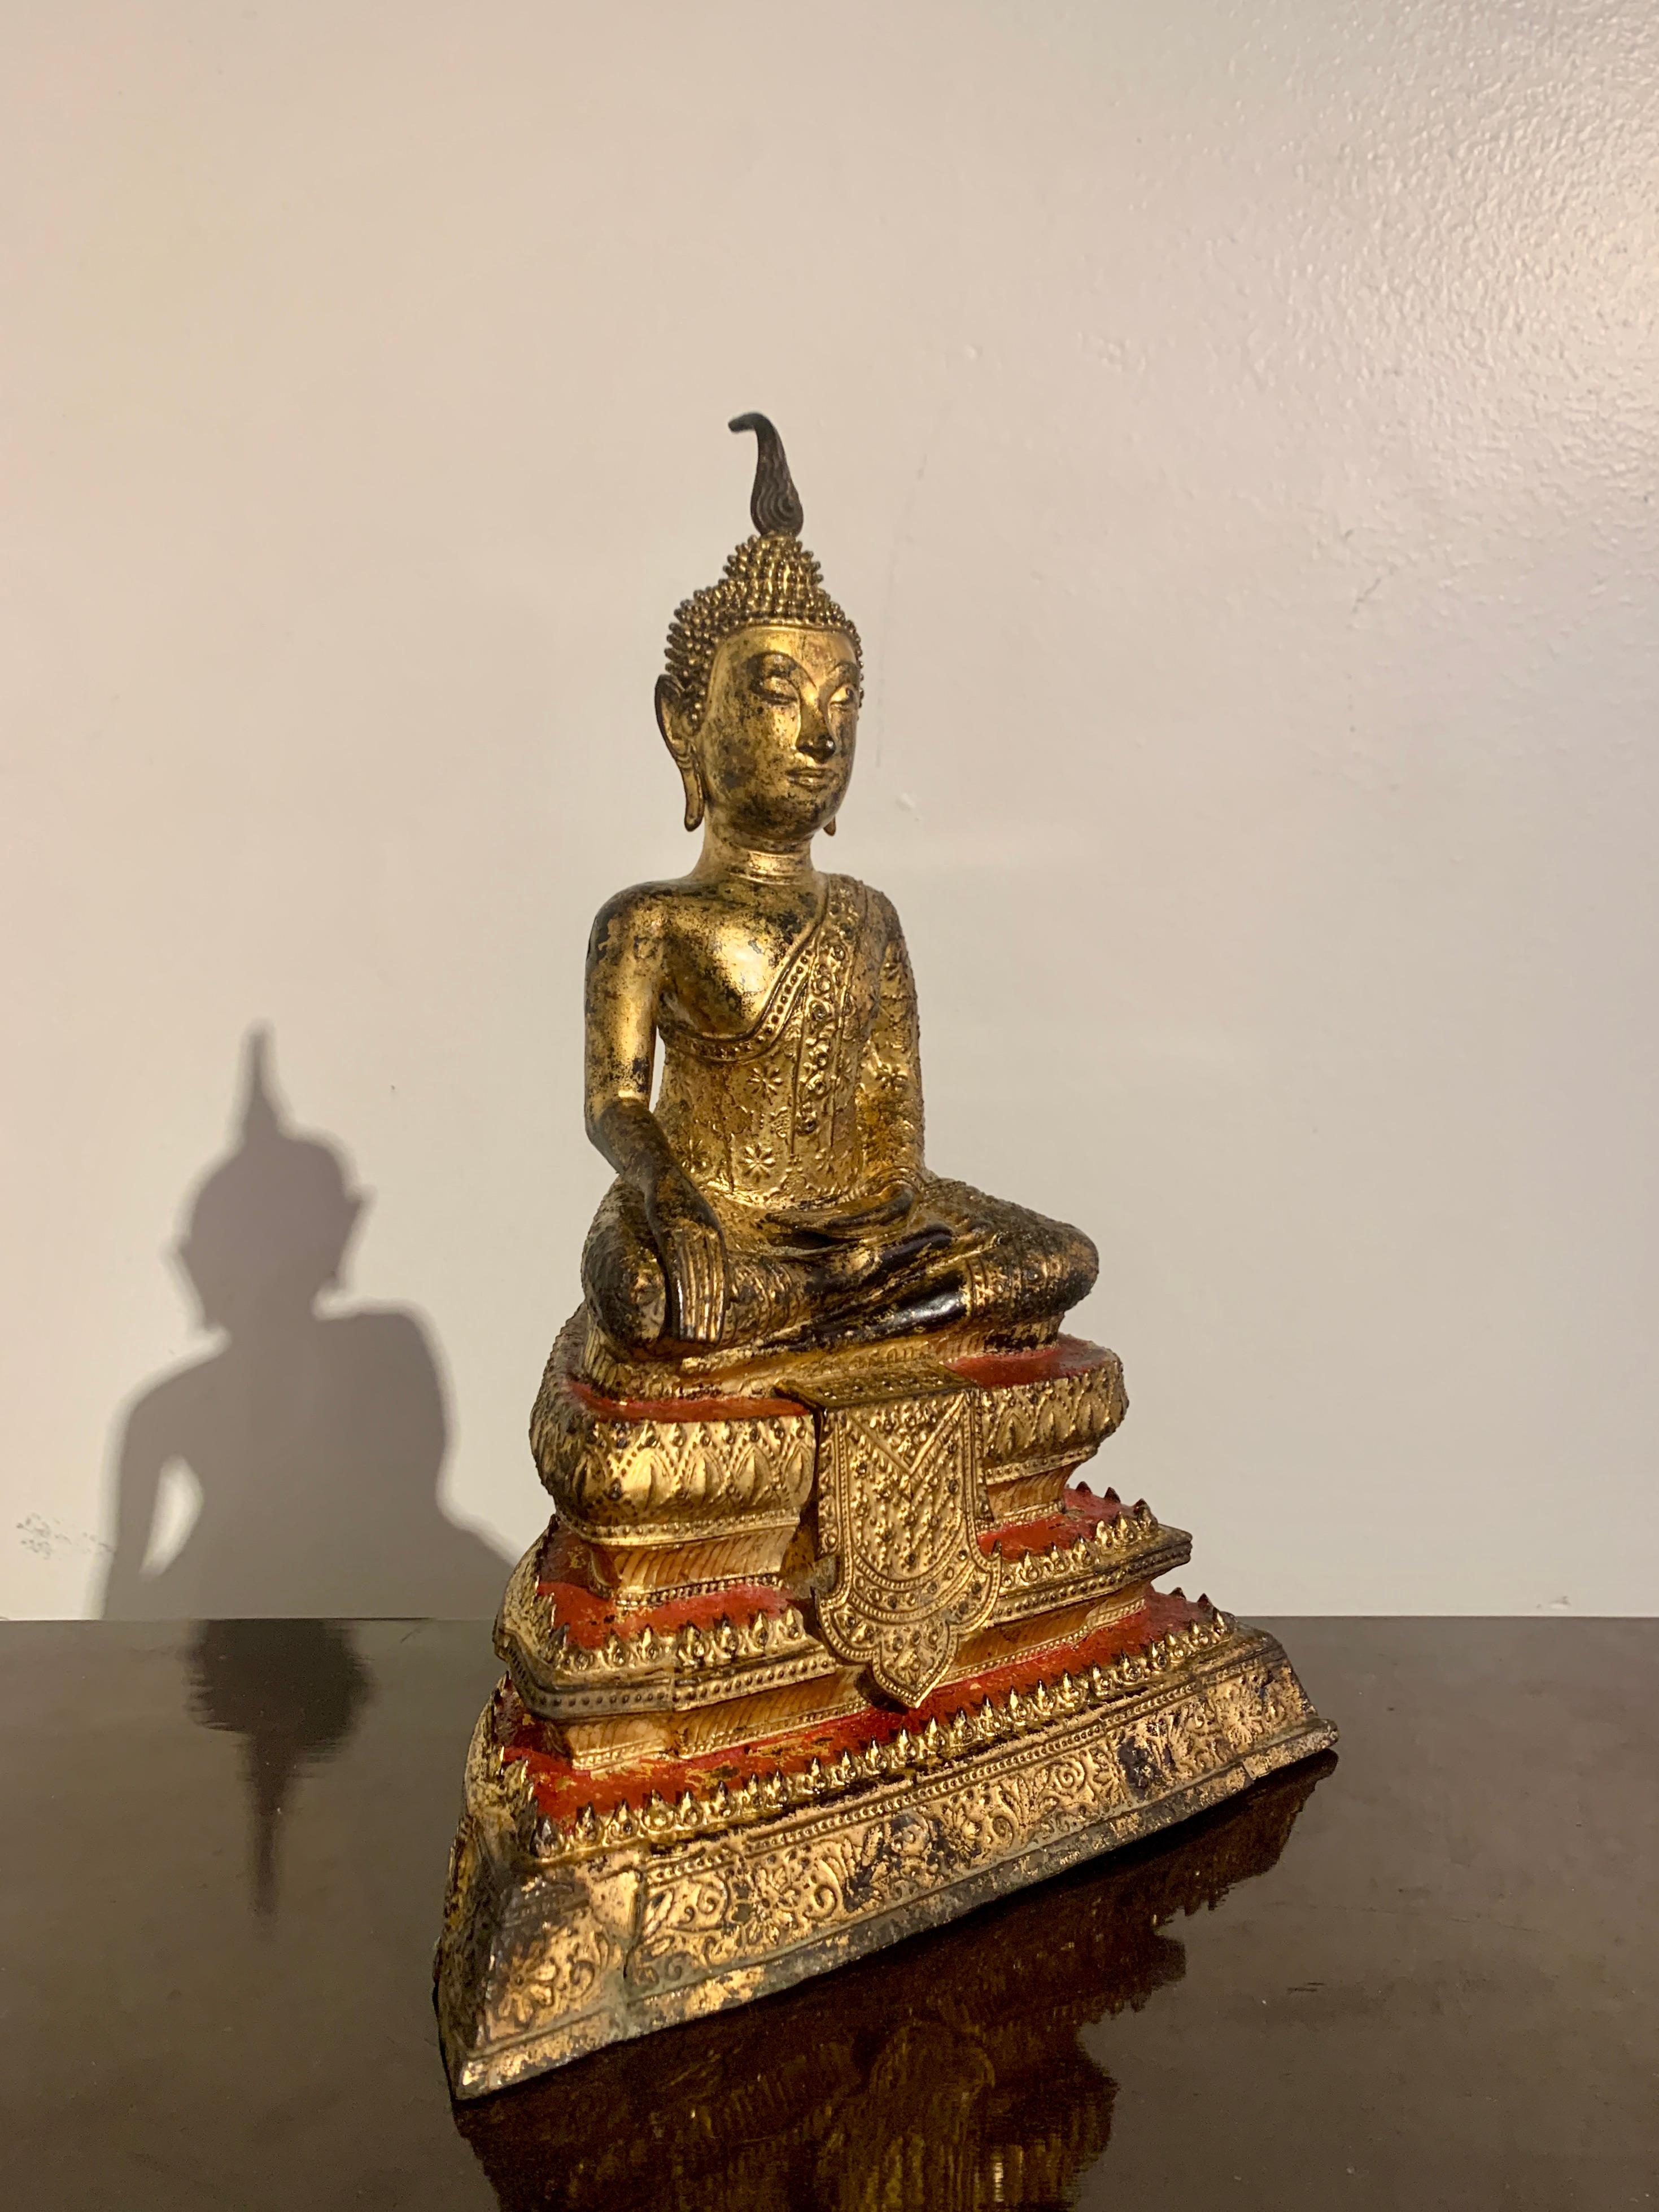 A lovely Thai lacquered and gilt cast bronze figure of the historical Buddha, Shakyamuni, portrayed in Maravijaya, Rattanakosin Period, early to mid 19th century, Thailand. 

The Buddha is portrayed in the attitude of Maravijaya, the Victory over